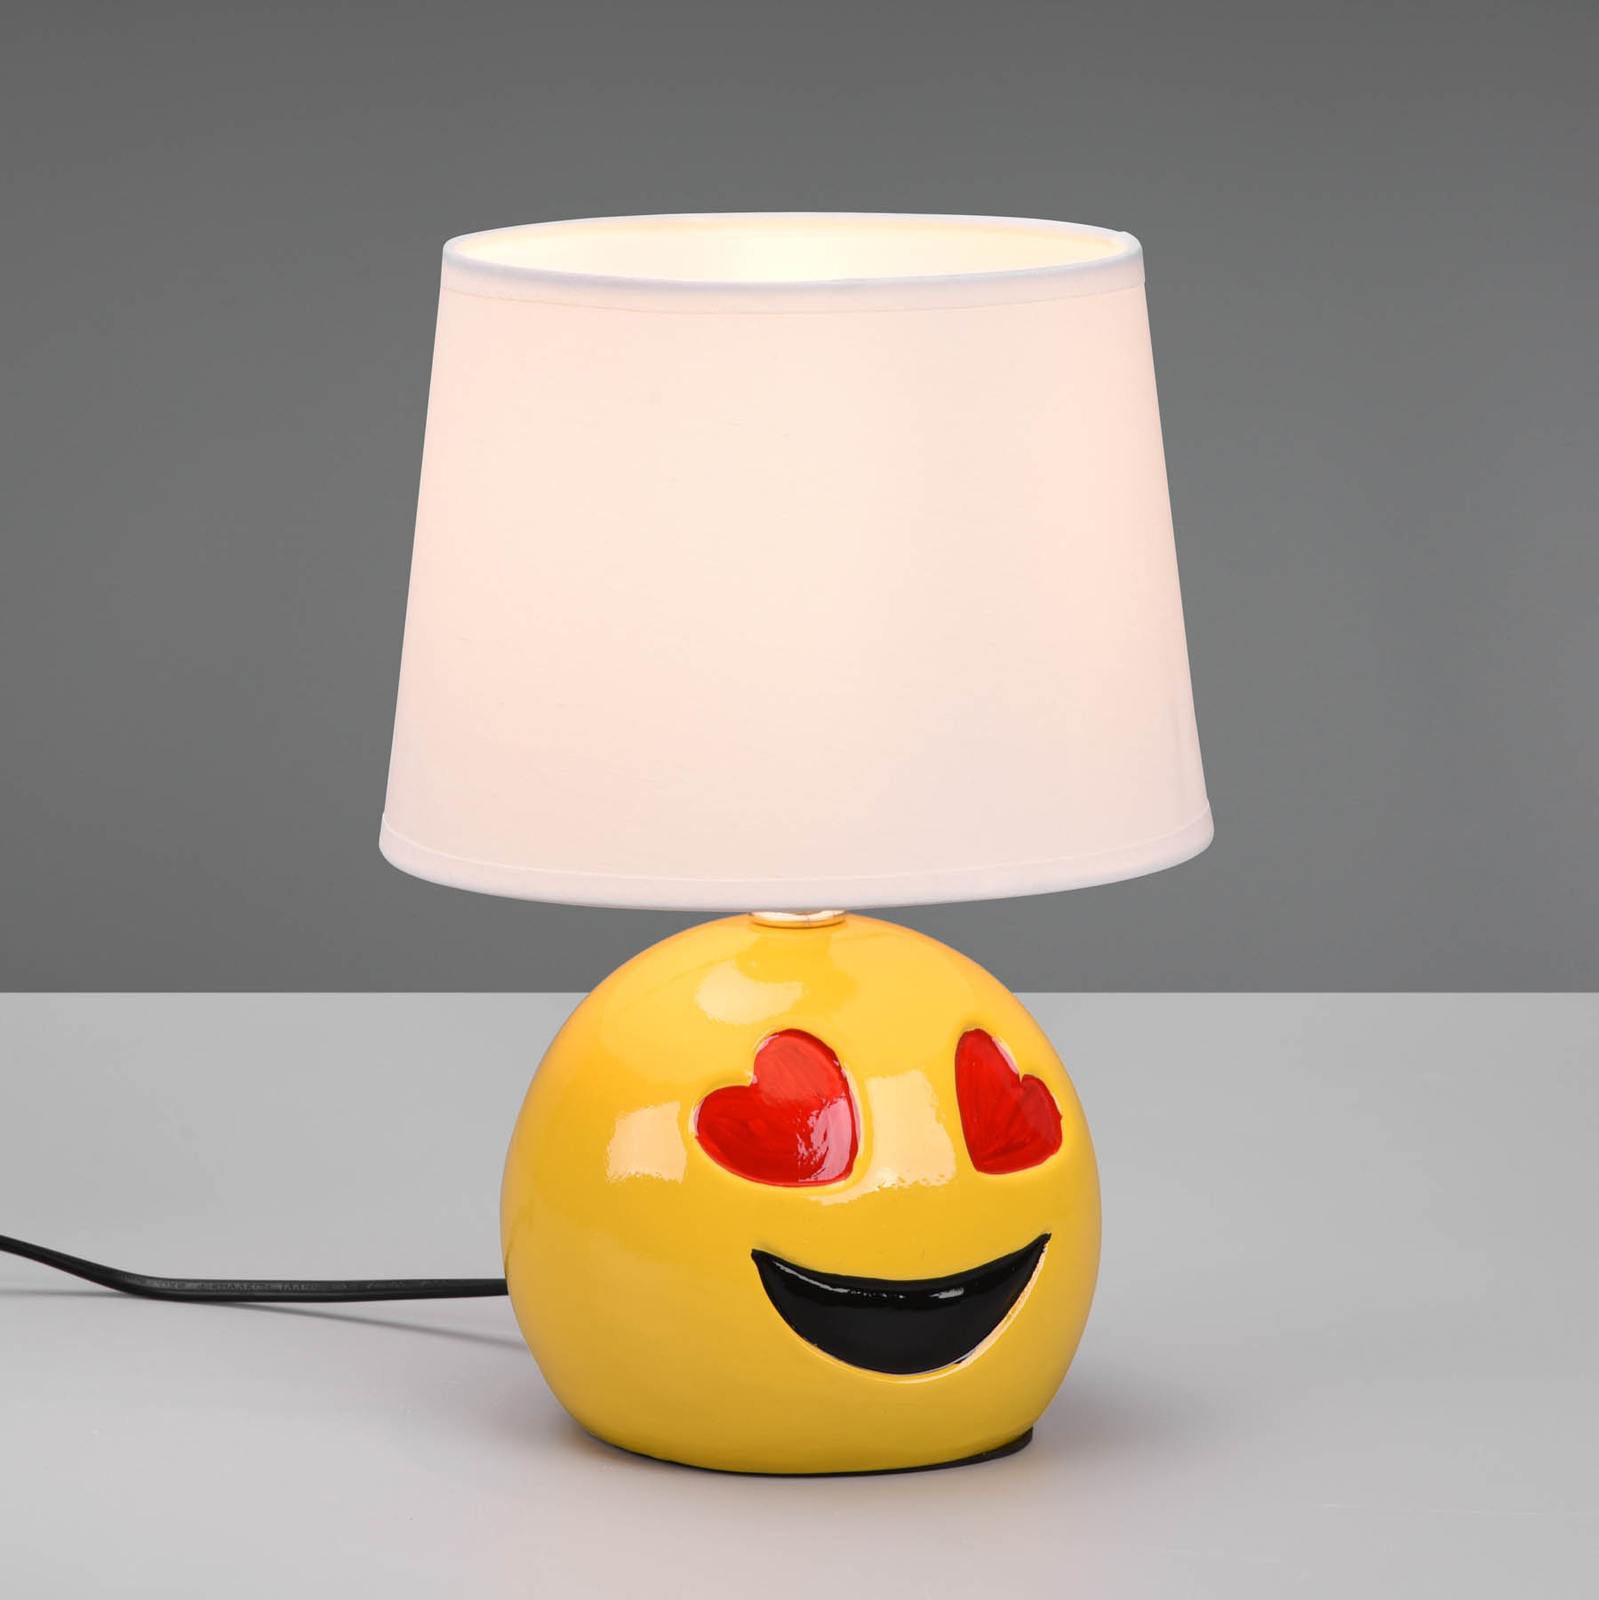 Lovely table lamp, smiley face, white lampshade